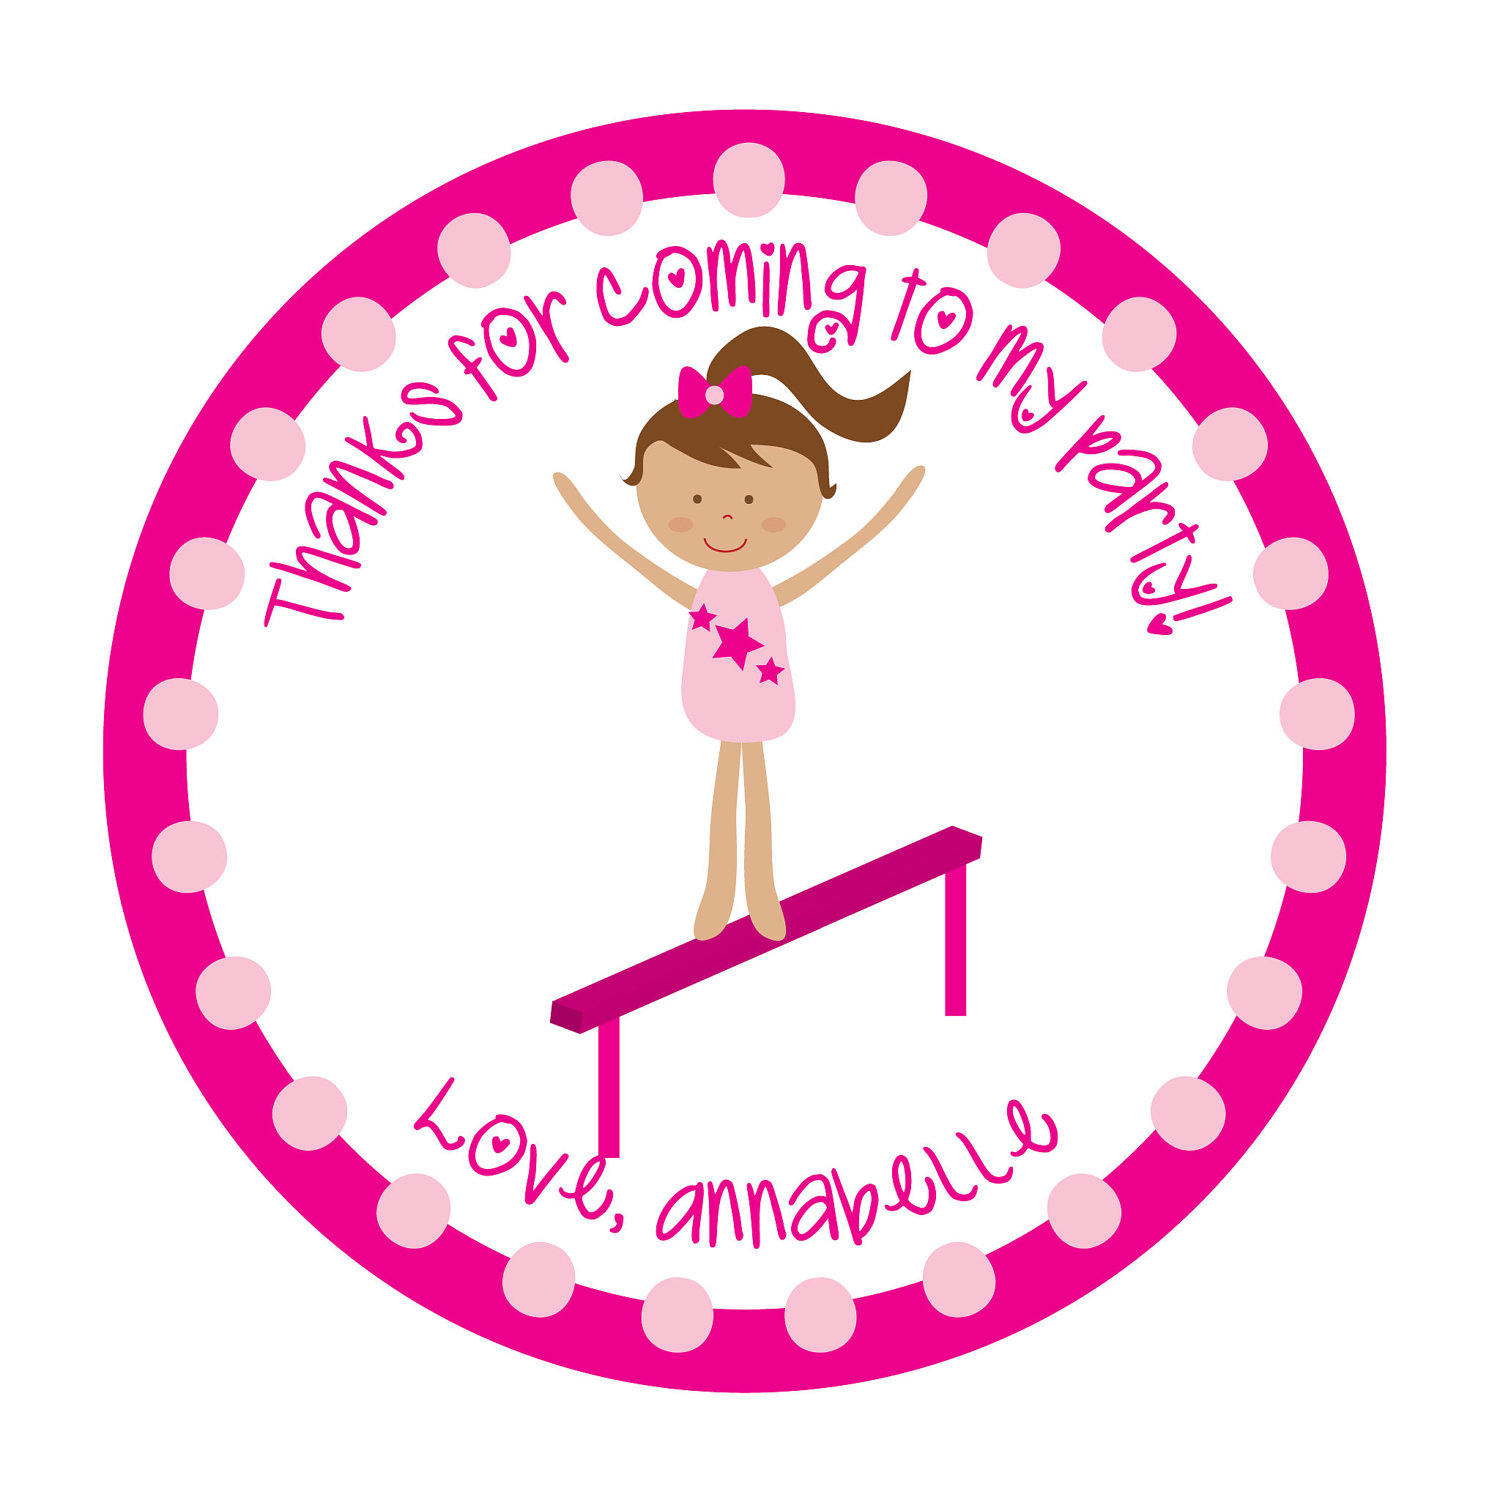 Tumbling gymnastics birthday party clip art pictures to pin